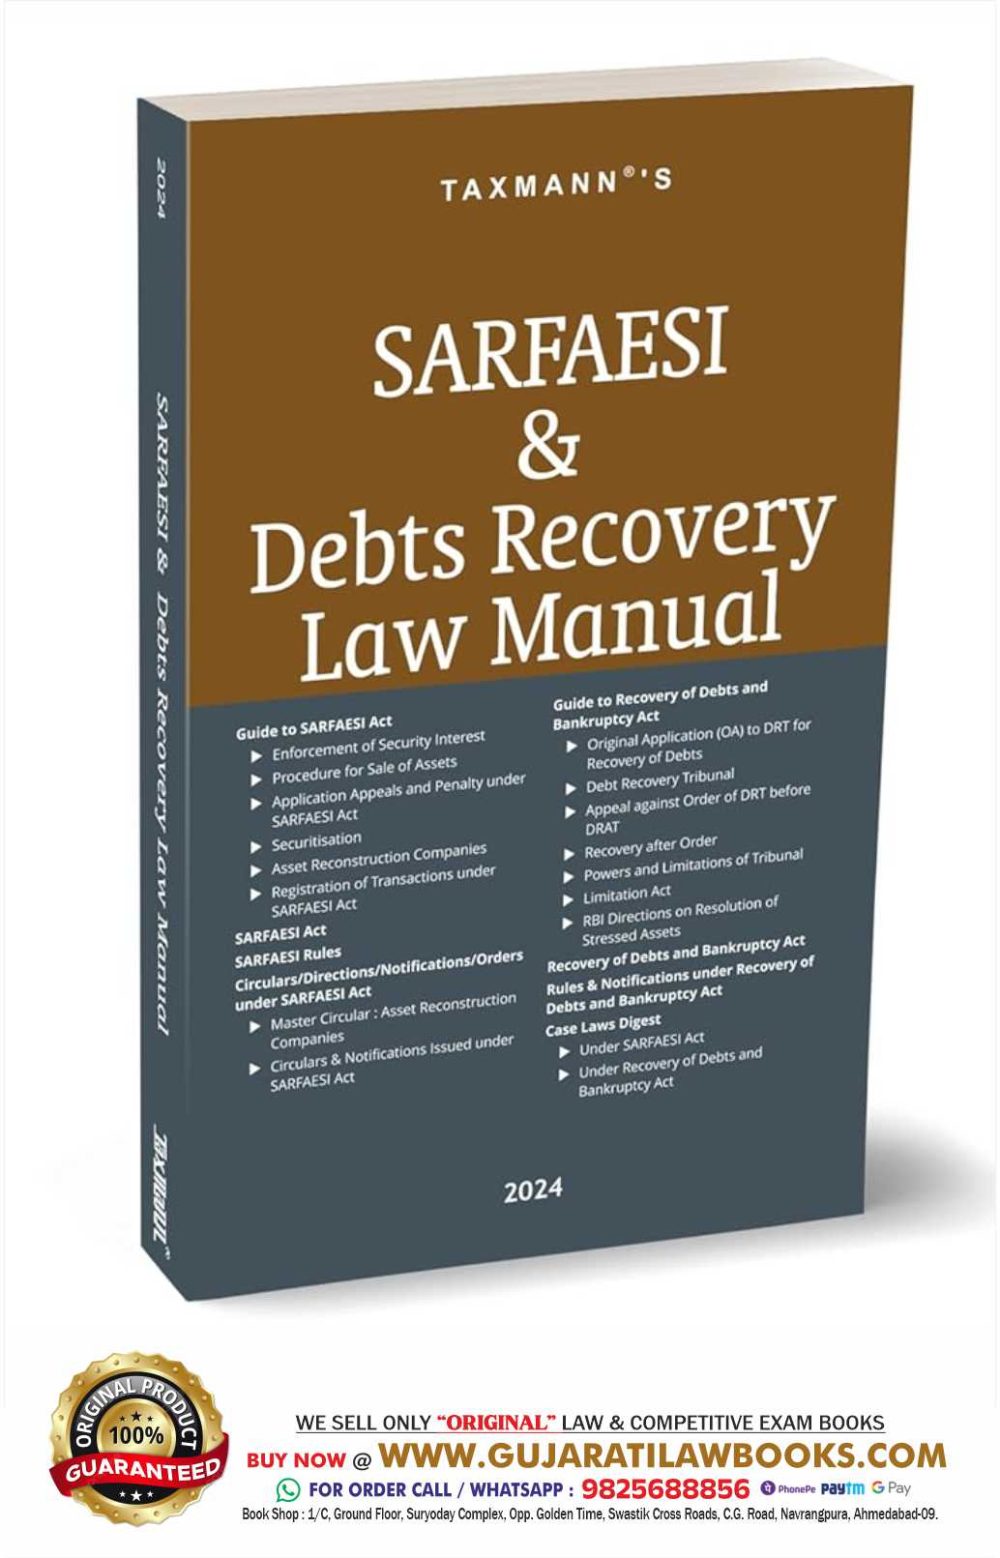 Taxmann's SARFAESI & Debts Recovery Law Manual – Combination of Statutes (Acts, Rules, Notifications, etc.), Case Laws & Commentary on SARFAESI & Debt Recovery Laws of India [2024]